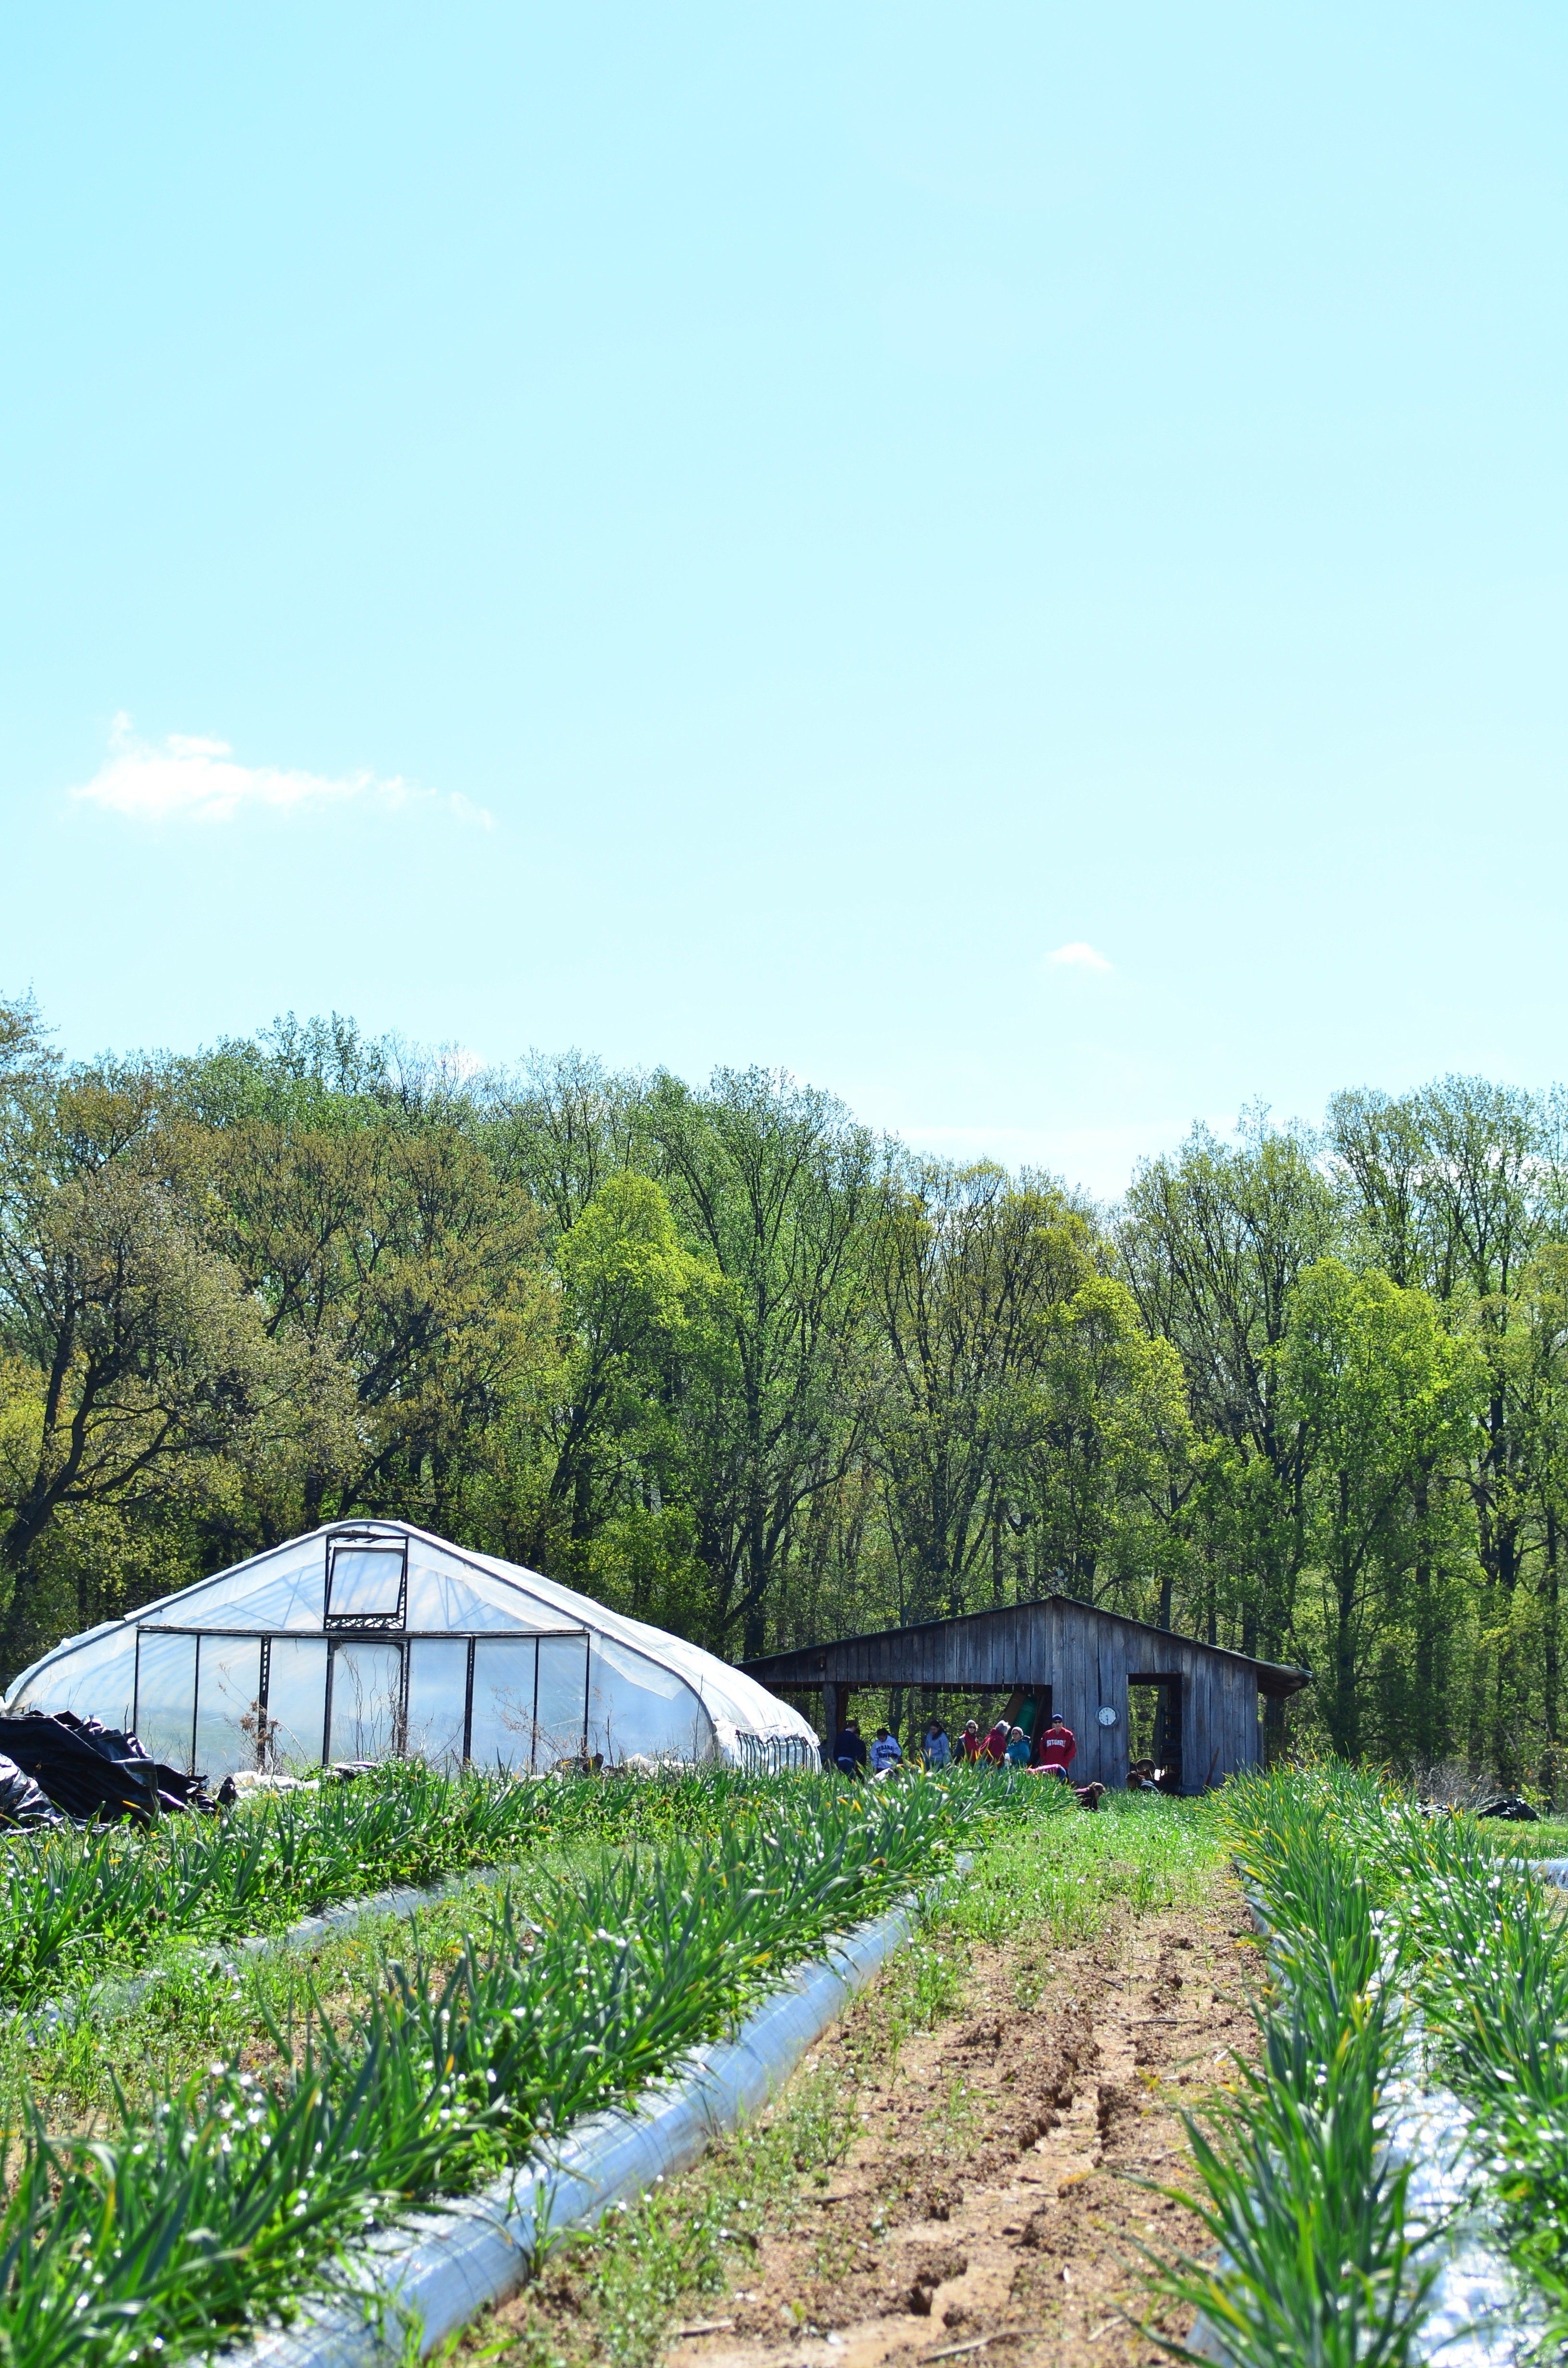 Previous Happening: Farm Stand Pop-Up Happening July 17